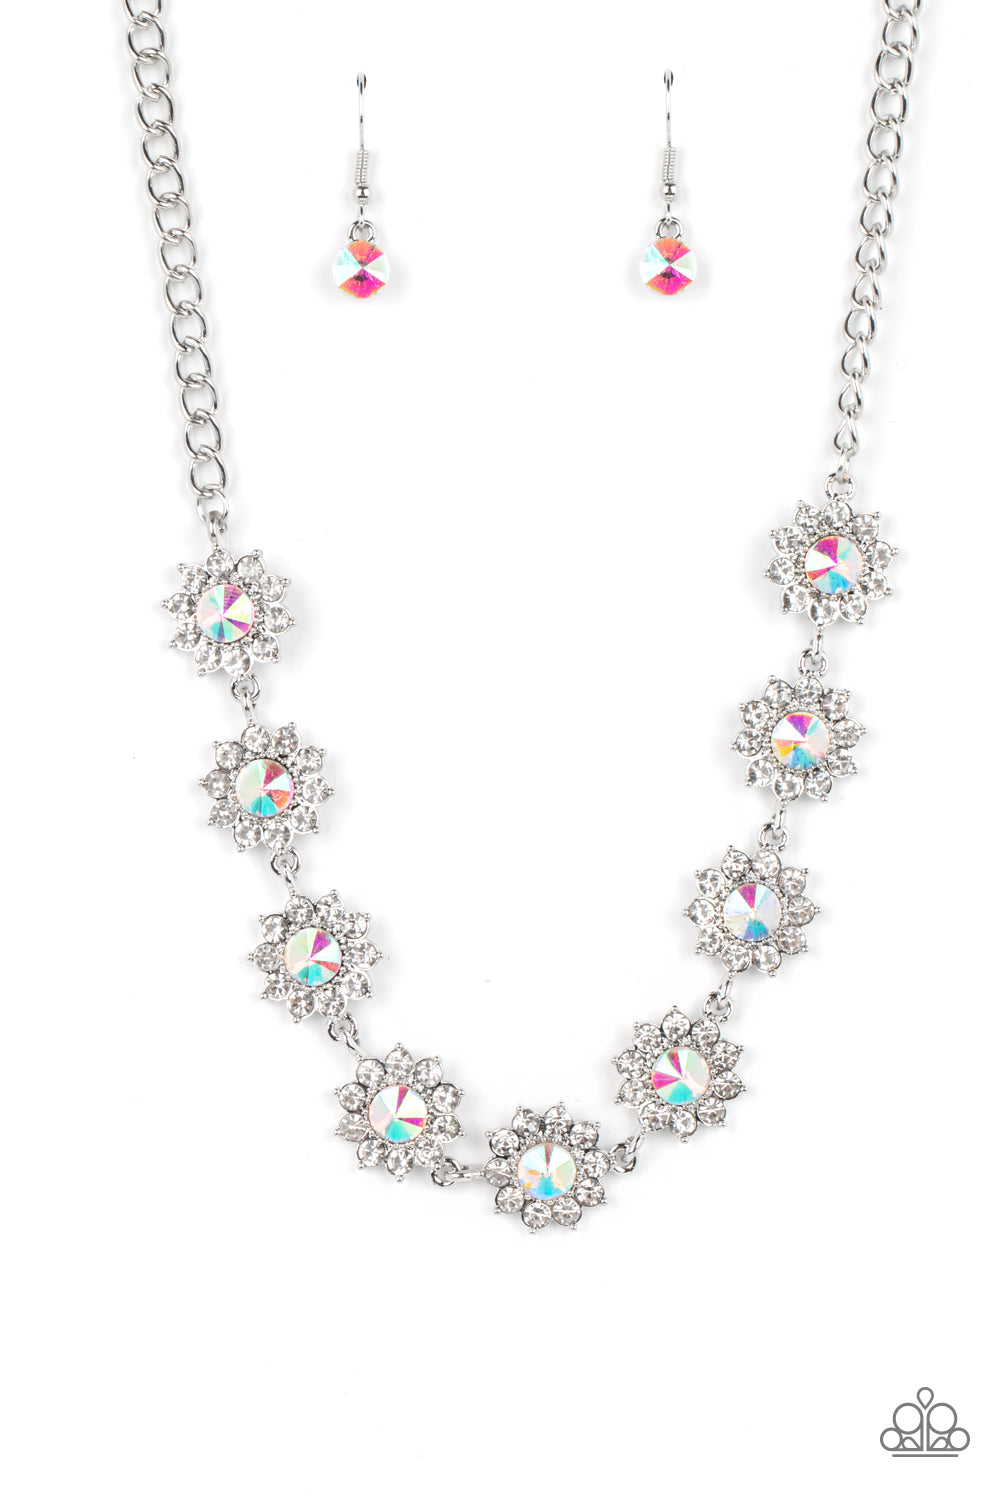 Blooming Brilliance - Multi (Iridescent) Necklace (LOP-0123)